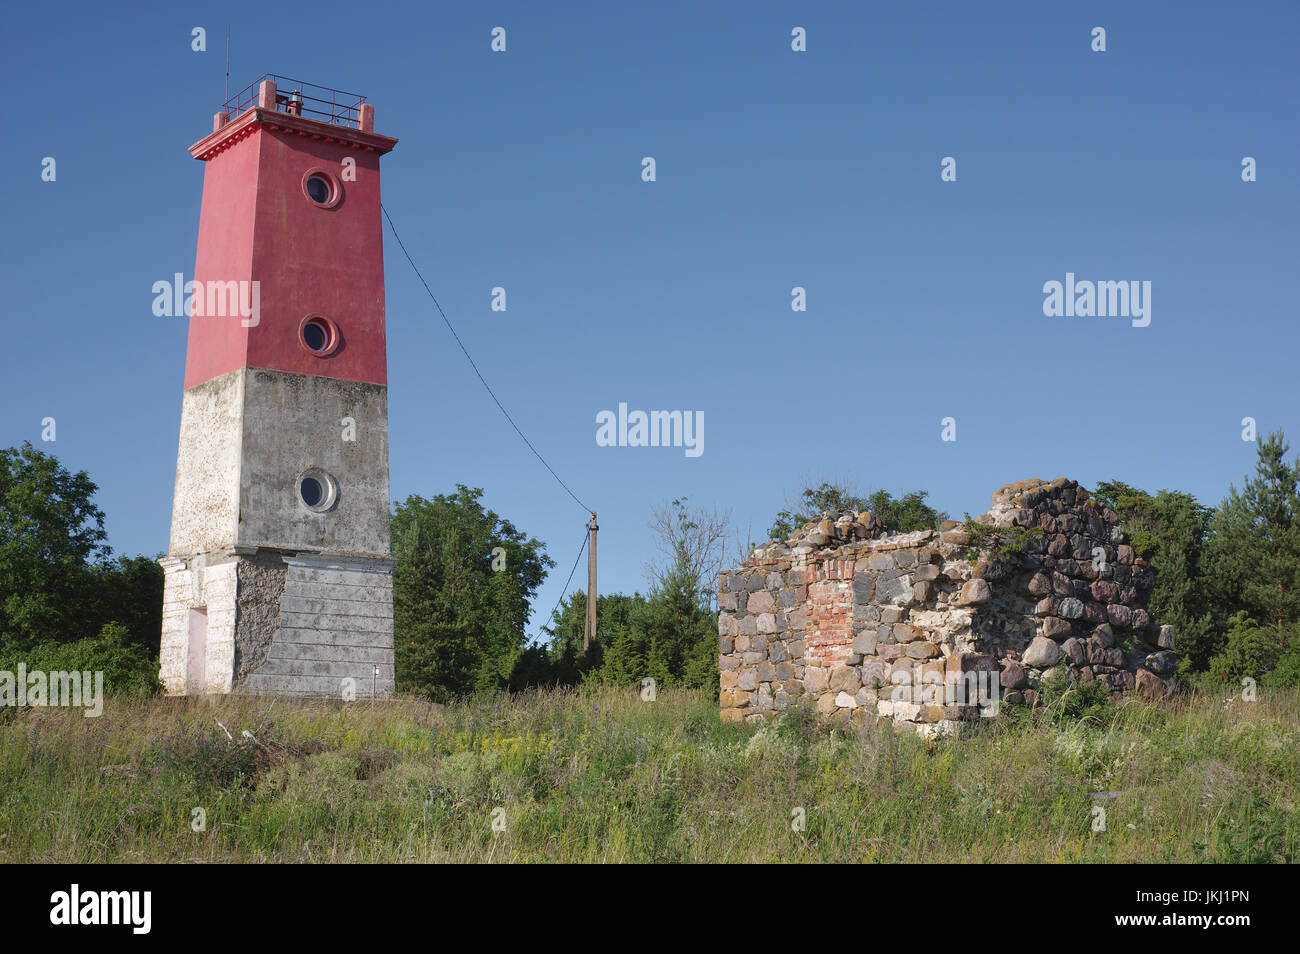 Virtsu lighthouse built 1924 with a height of 18 metres, and a diameter of 2.5 metres. Estonia 14th July 2017 Stock Photo